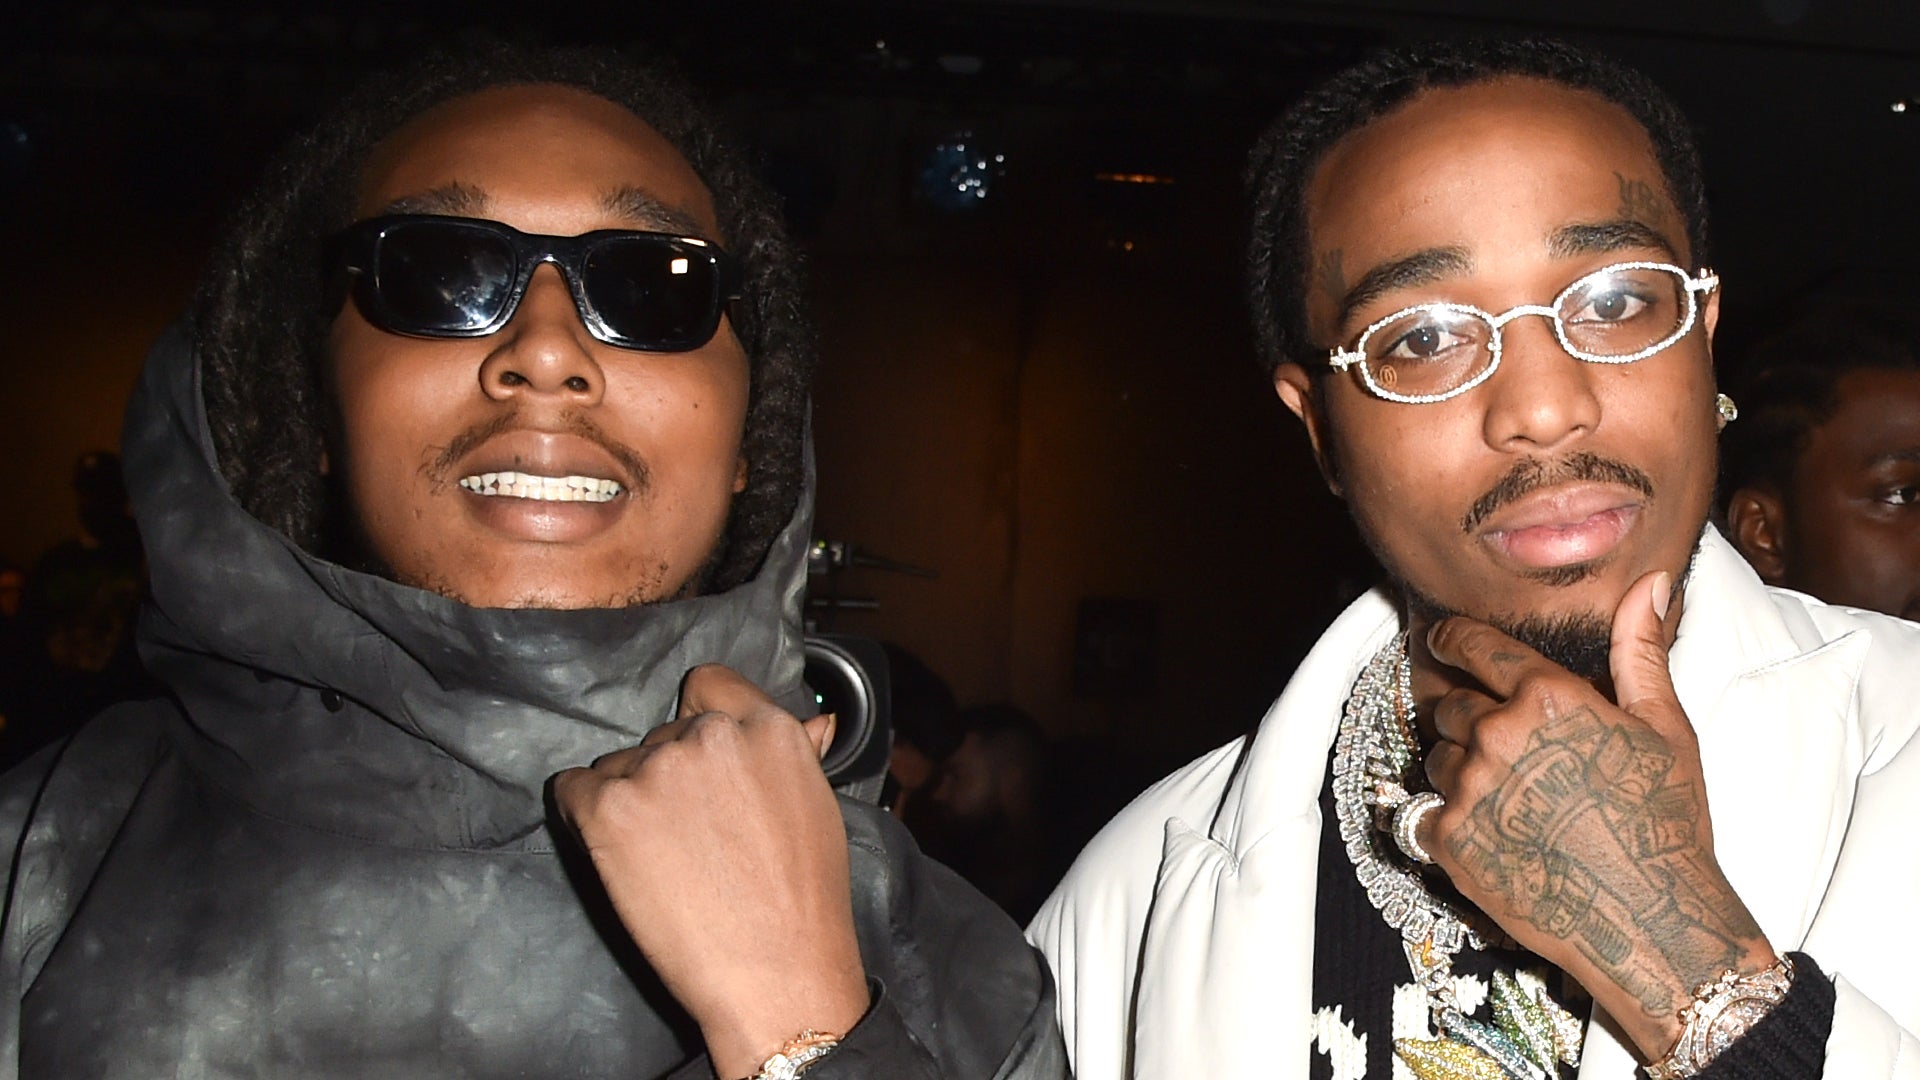 Quavo & Takeoff Begin Motown Takeover Of 'Colors' For Black Music